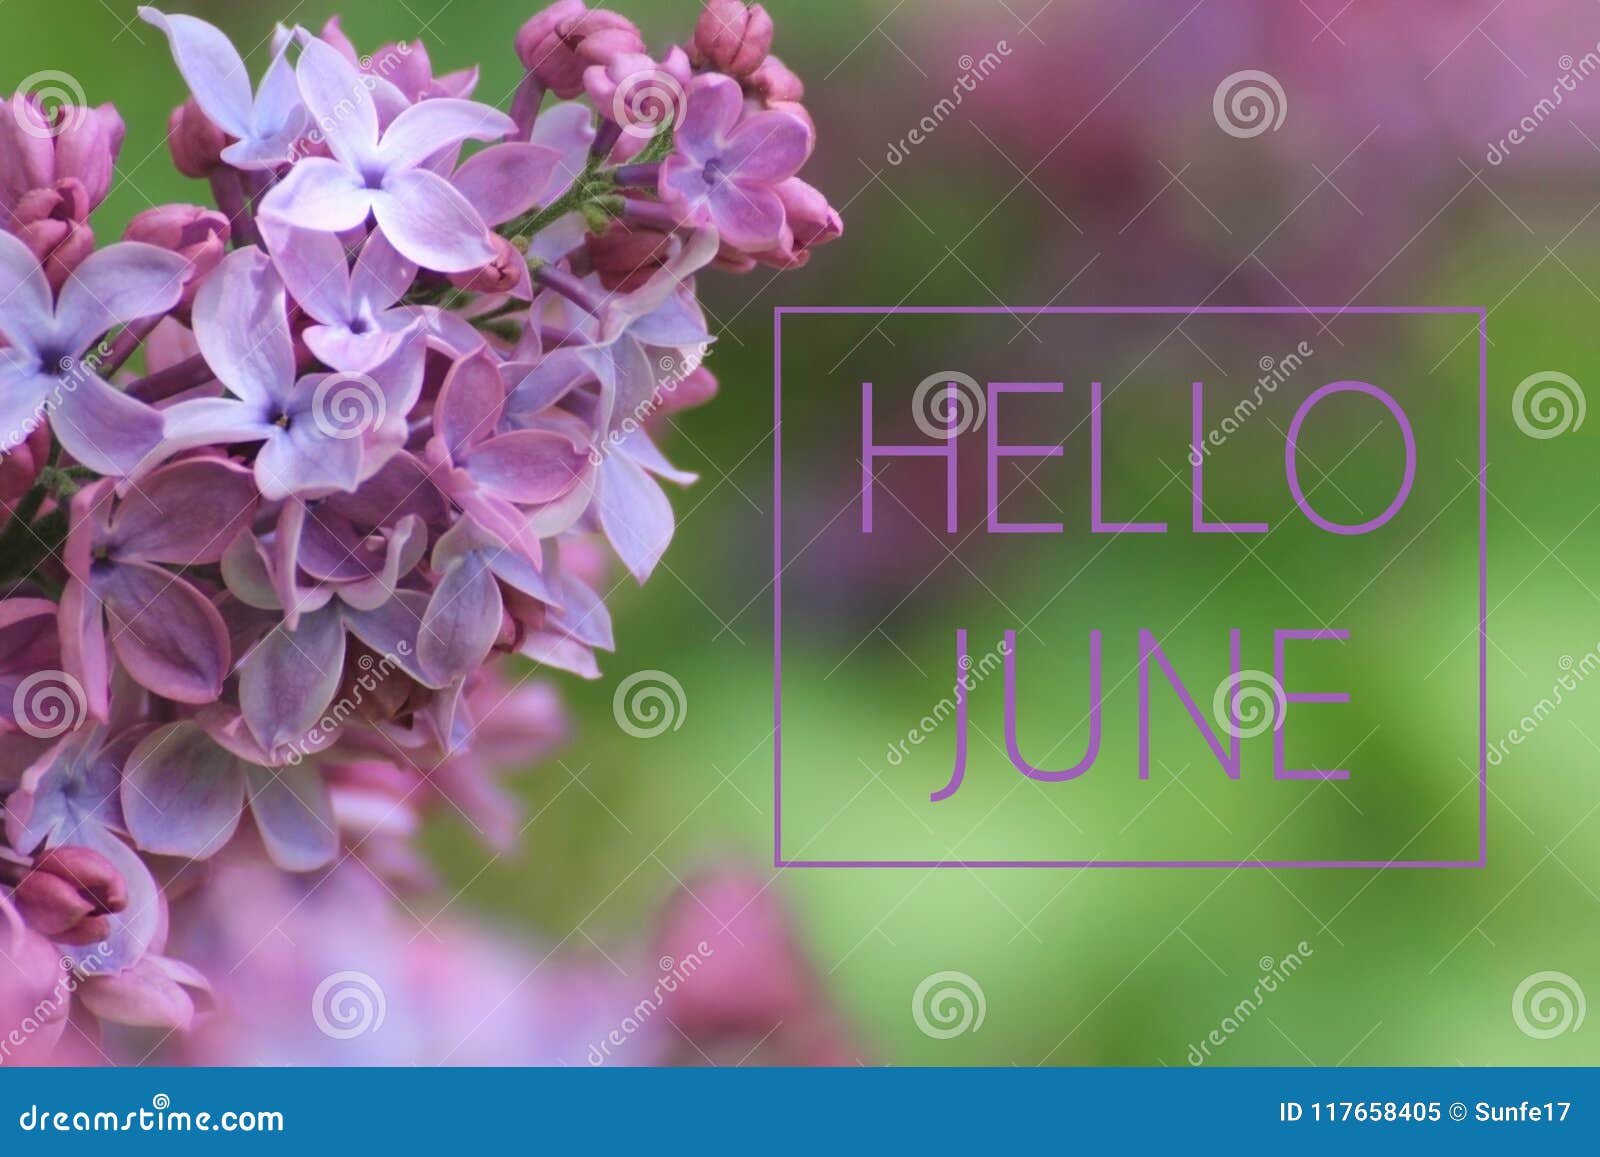 hello june text on lilac branch background